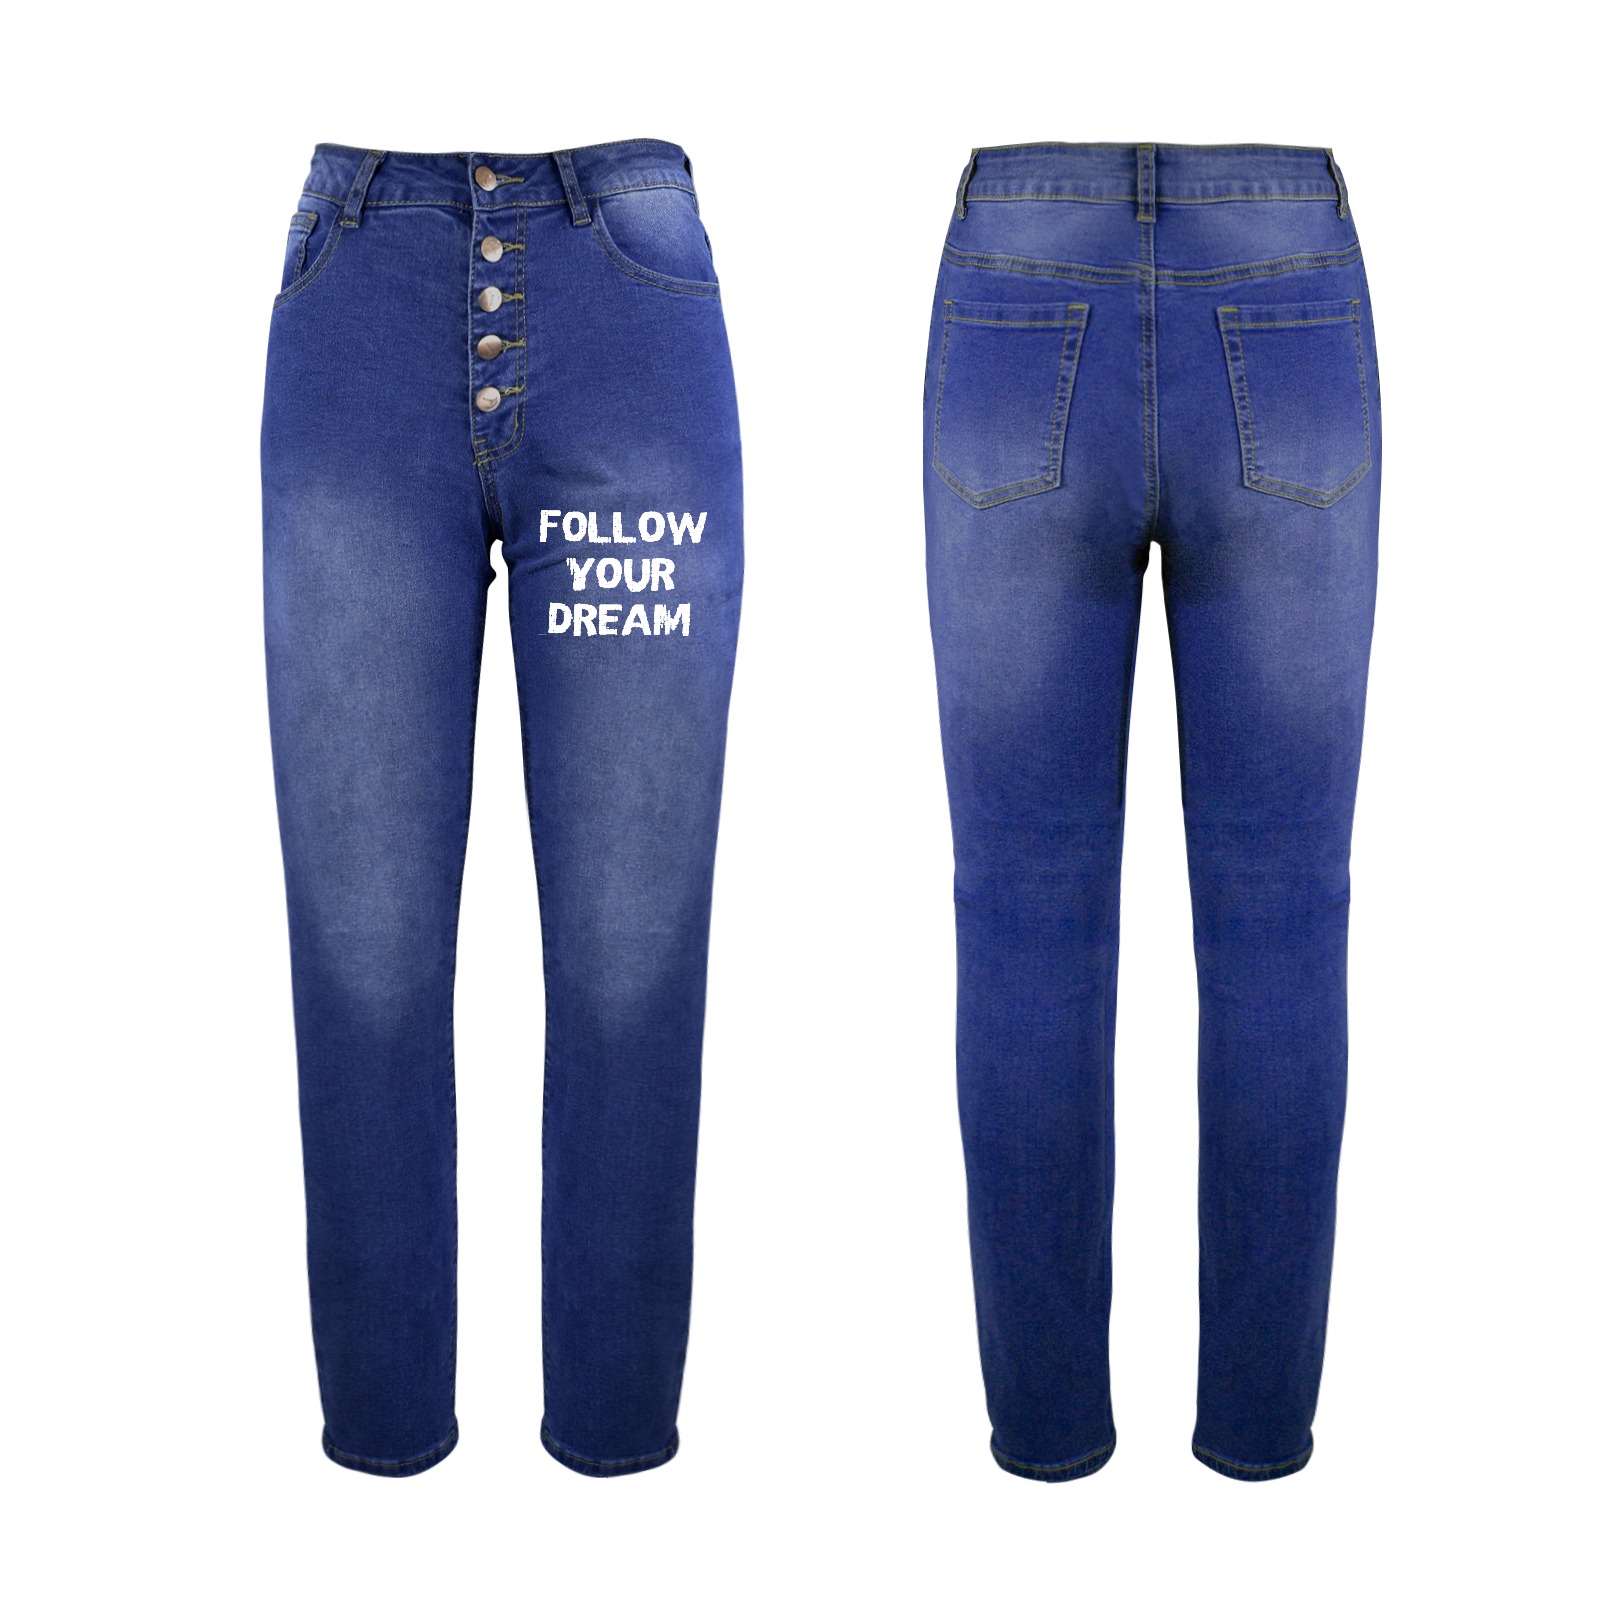 Follow your dream cool awesome white text. Women's Jeans (Front Printing)